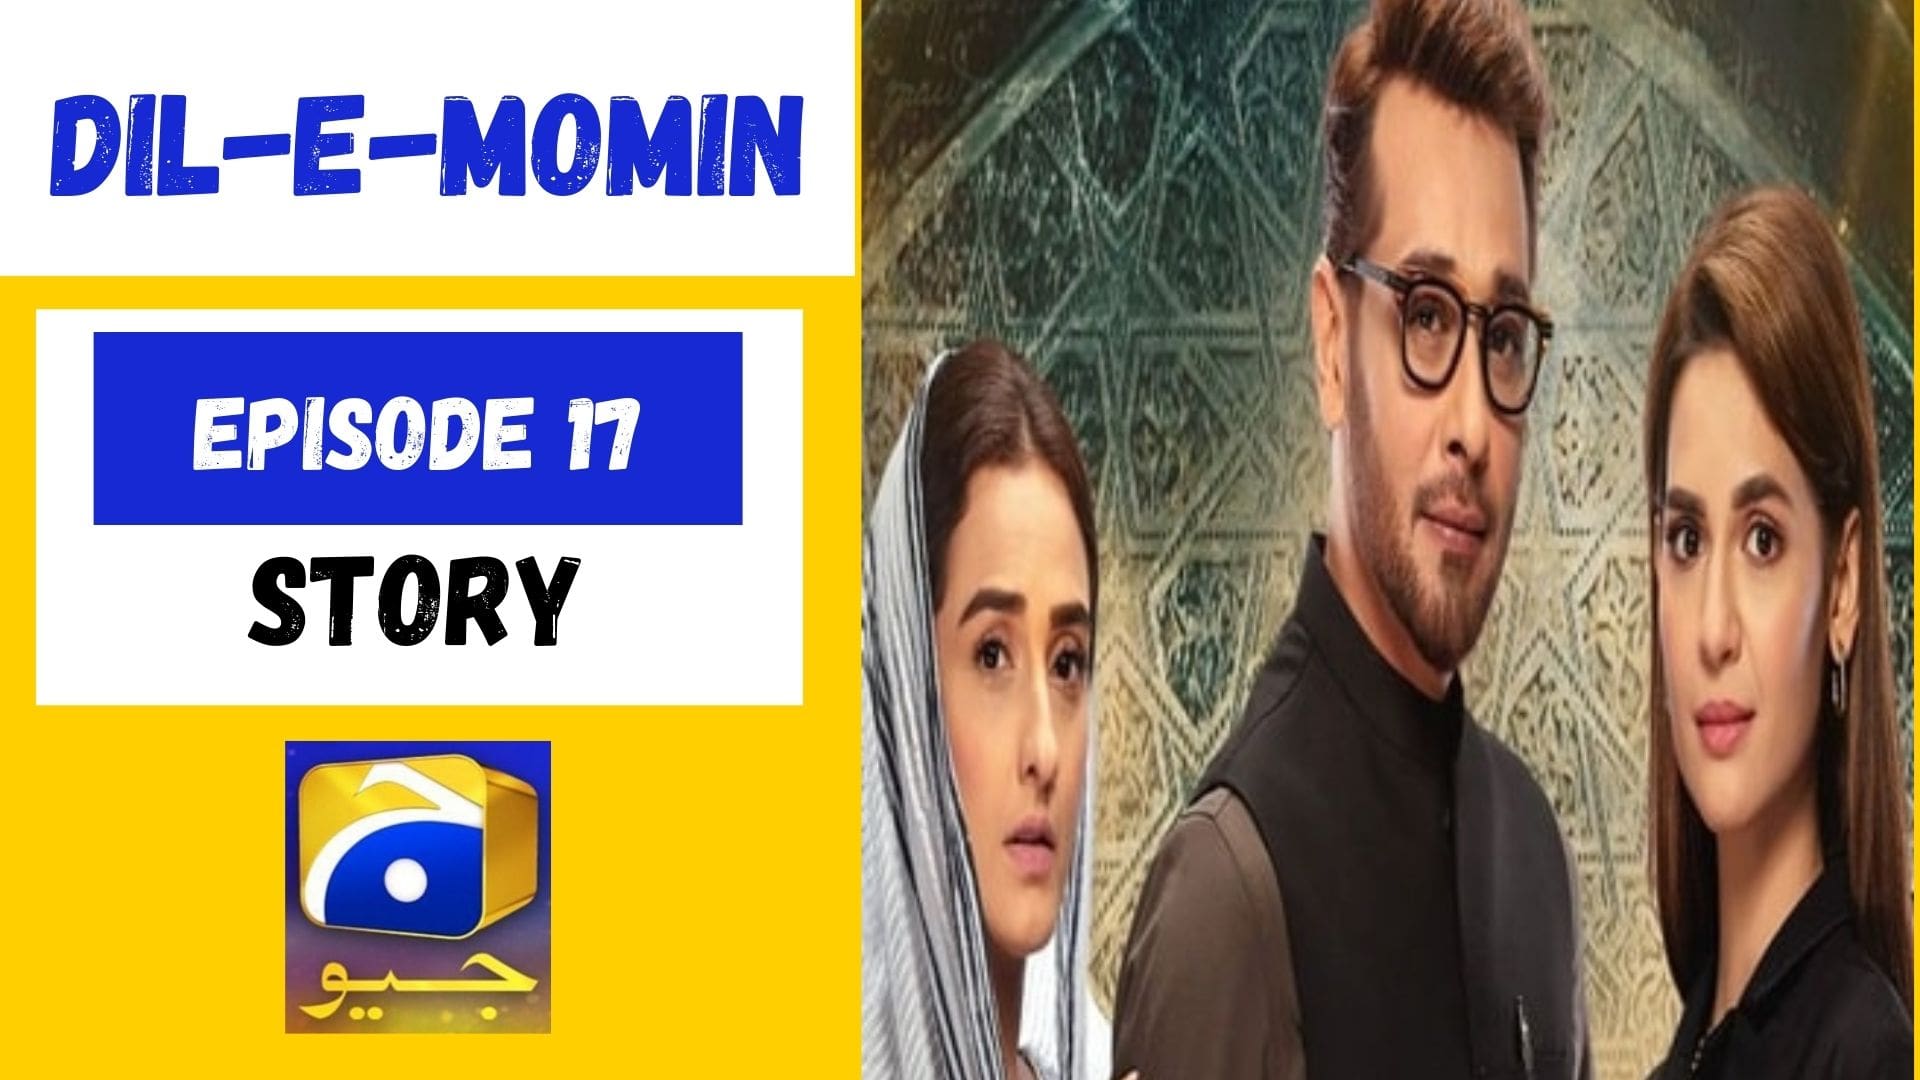 Dil-e-Momin Episode 17 Story